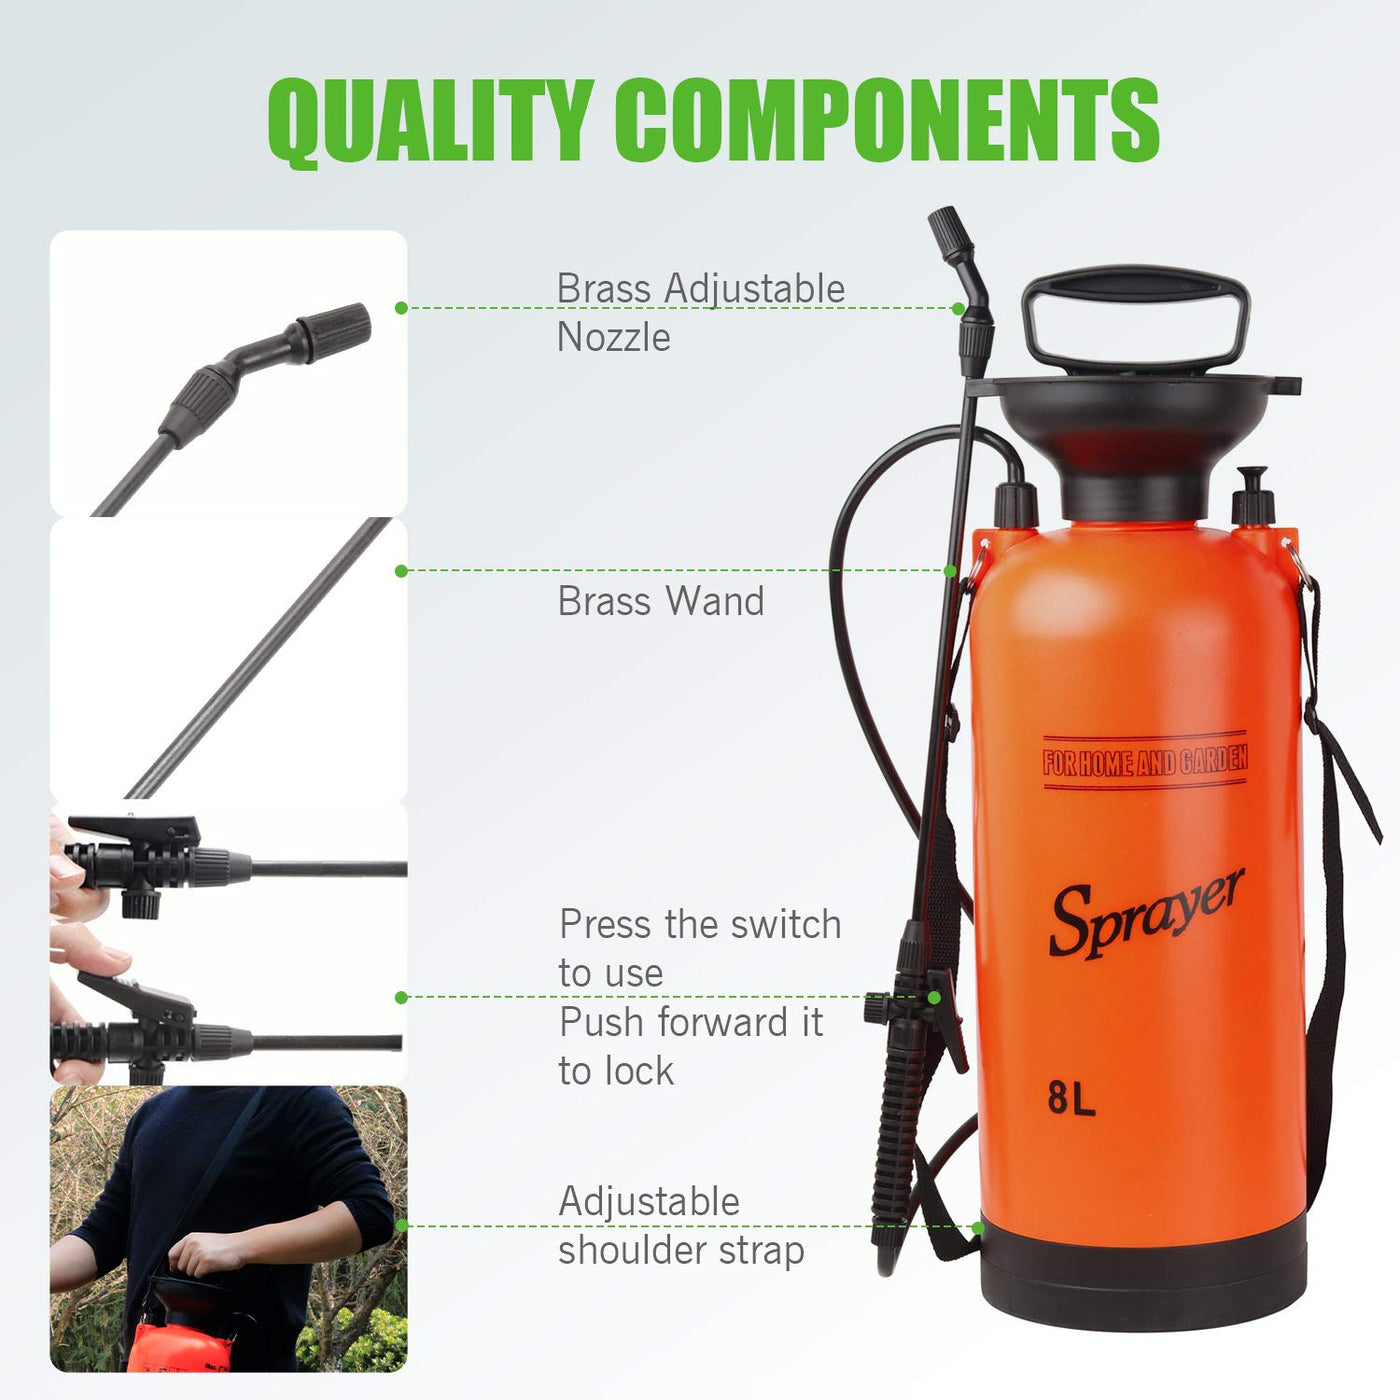  CLICIC 2 Gallon Lawn and Garden Portable Sprayer, Pump  Pressure Sprayer with Air Valve and Adjustable Shoulder Strap for Yard Lawn  Weeds Plants : Patio, Lawn & Garden